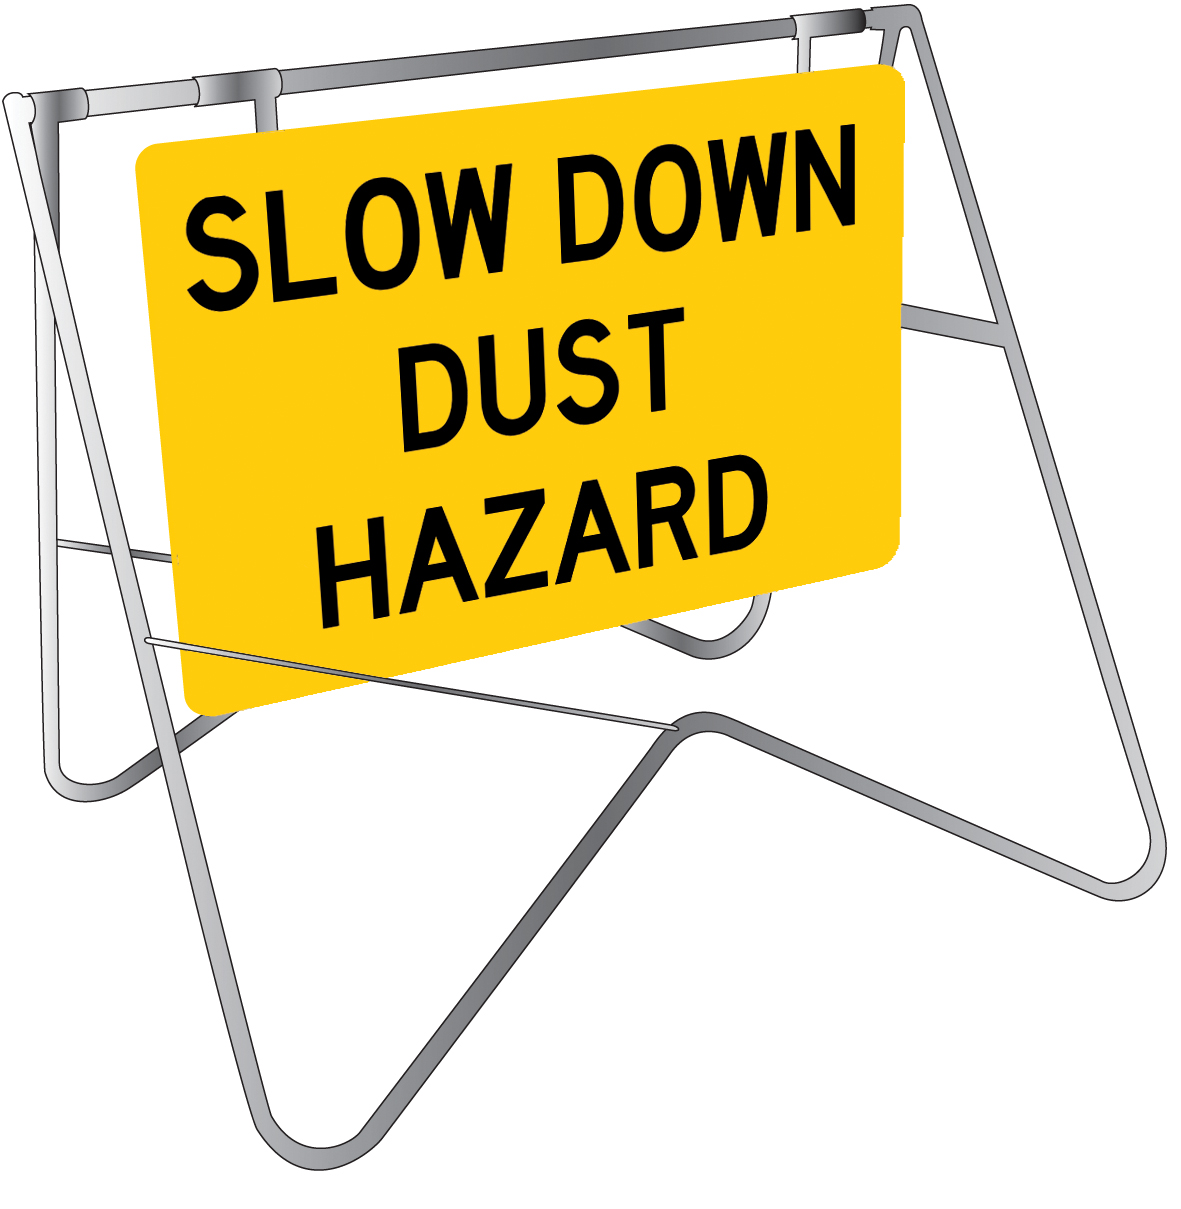 UNIFORM SAFETY 900X600MM CL1 SWING STAND AND SIGN SLOW DOWN DUST HAZAR